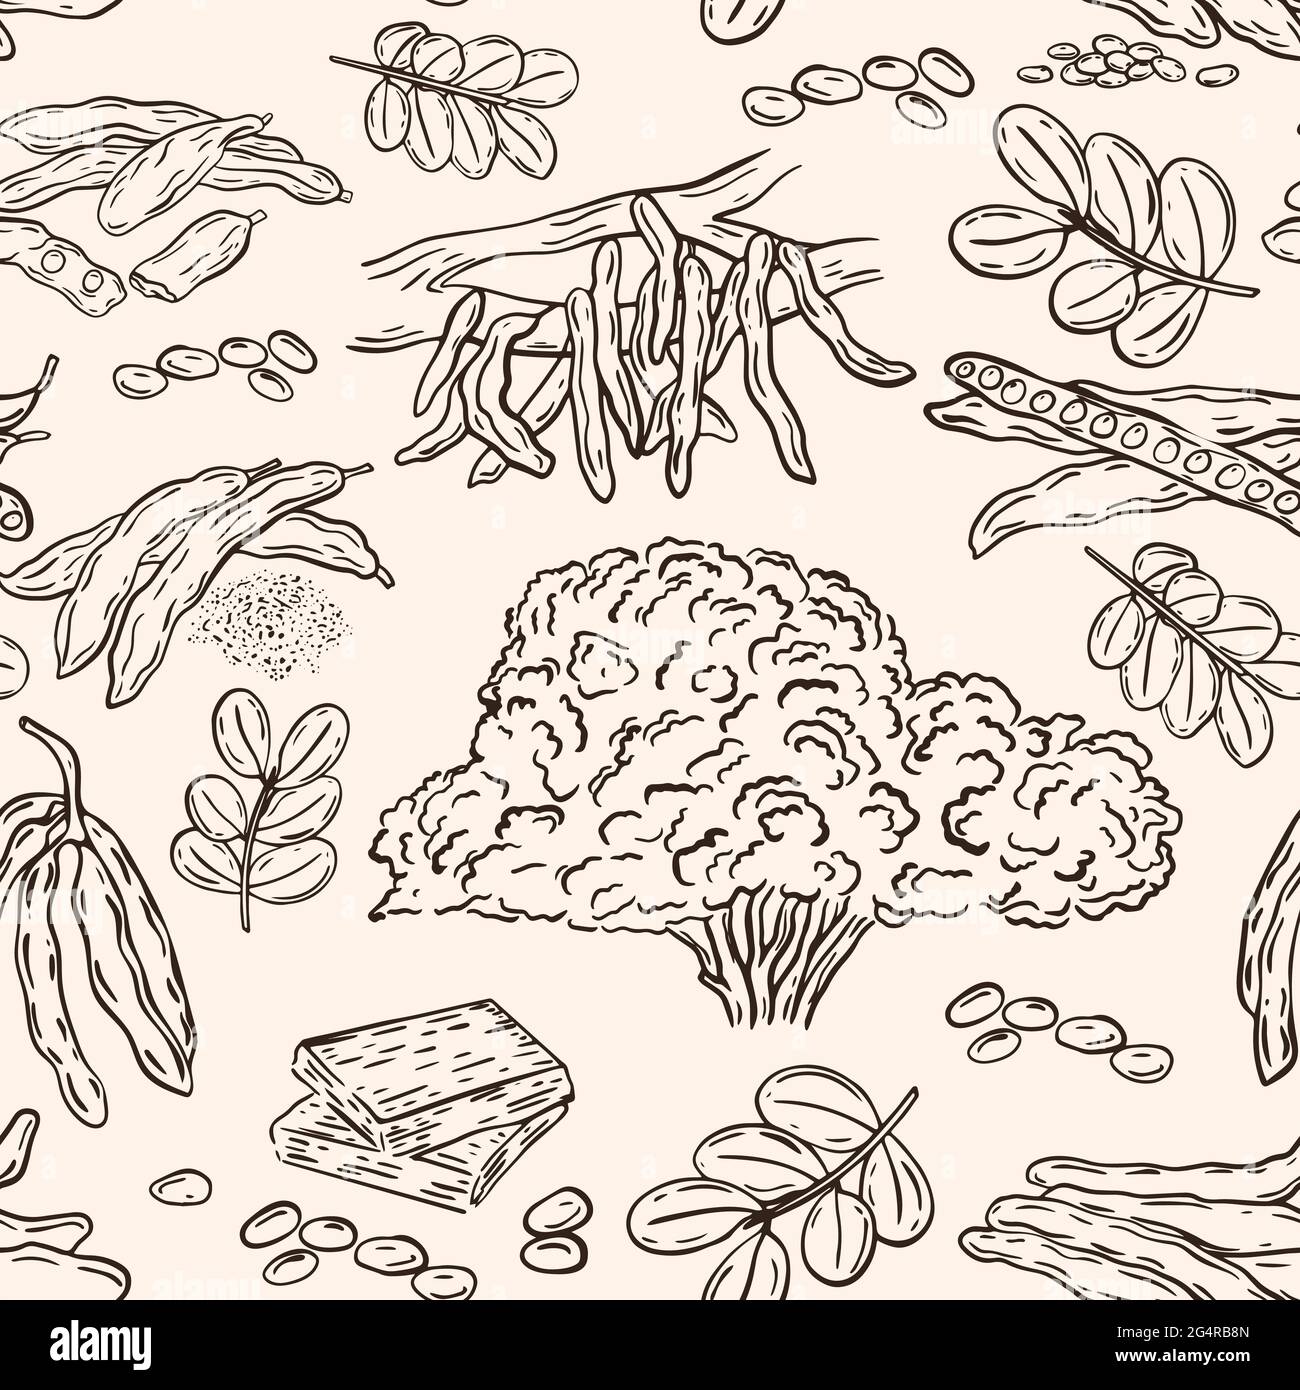 Carob seamless pattern, vector. Fruit sketch of the super product carob, wallpaper. Background with hand drawing pods, seeds and trees. Food template. Stock Vector